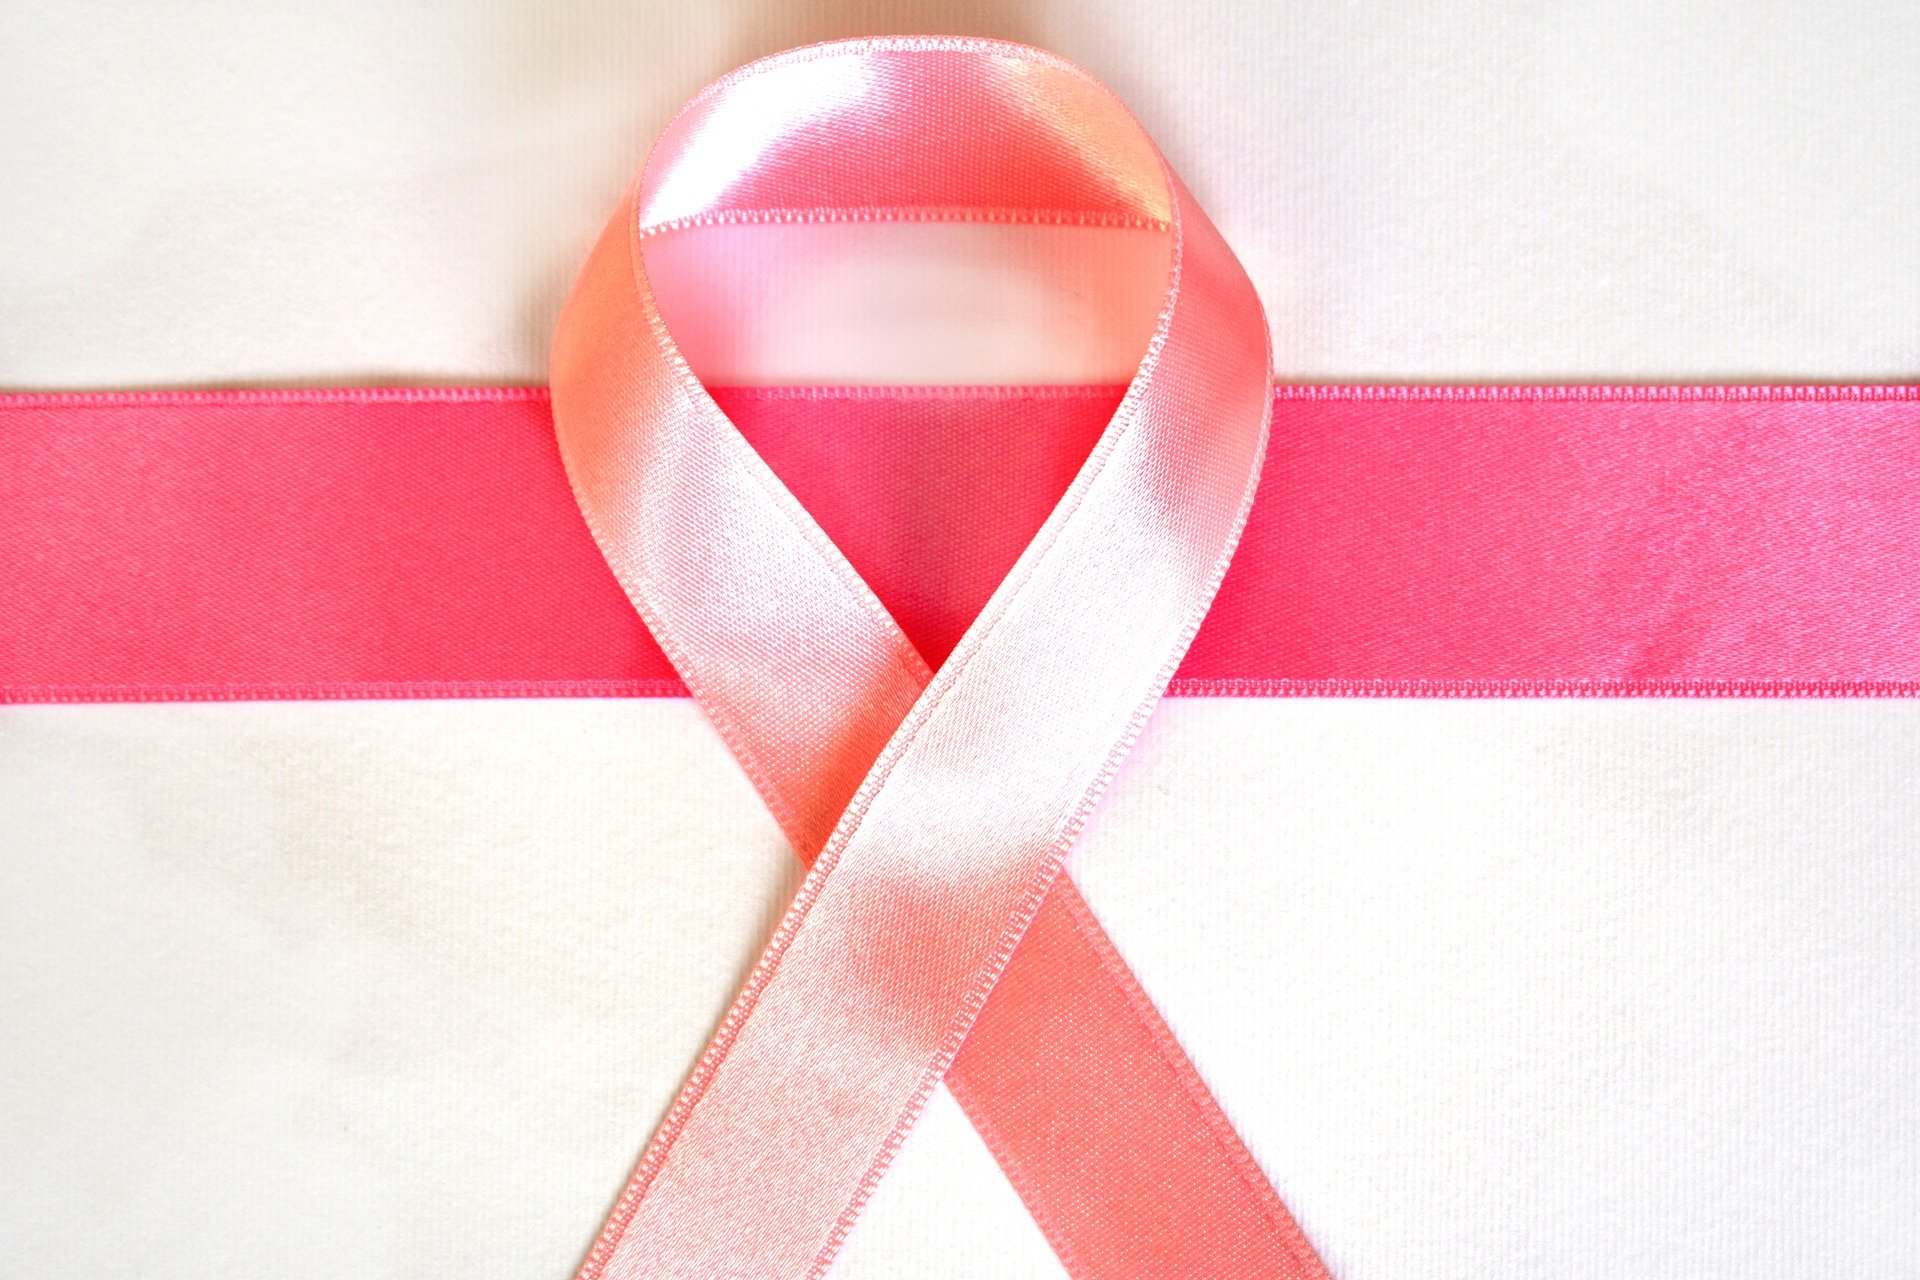 10 Complementary and Lifestyle Approaches to Help with Breast Cancer Care